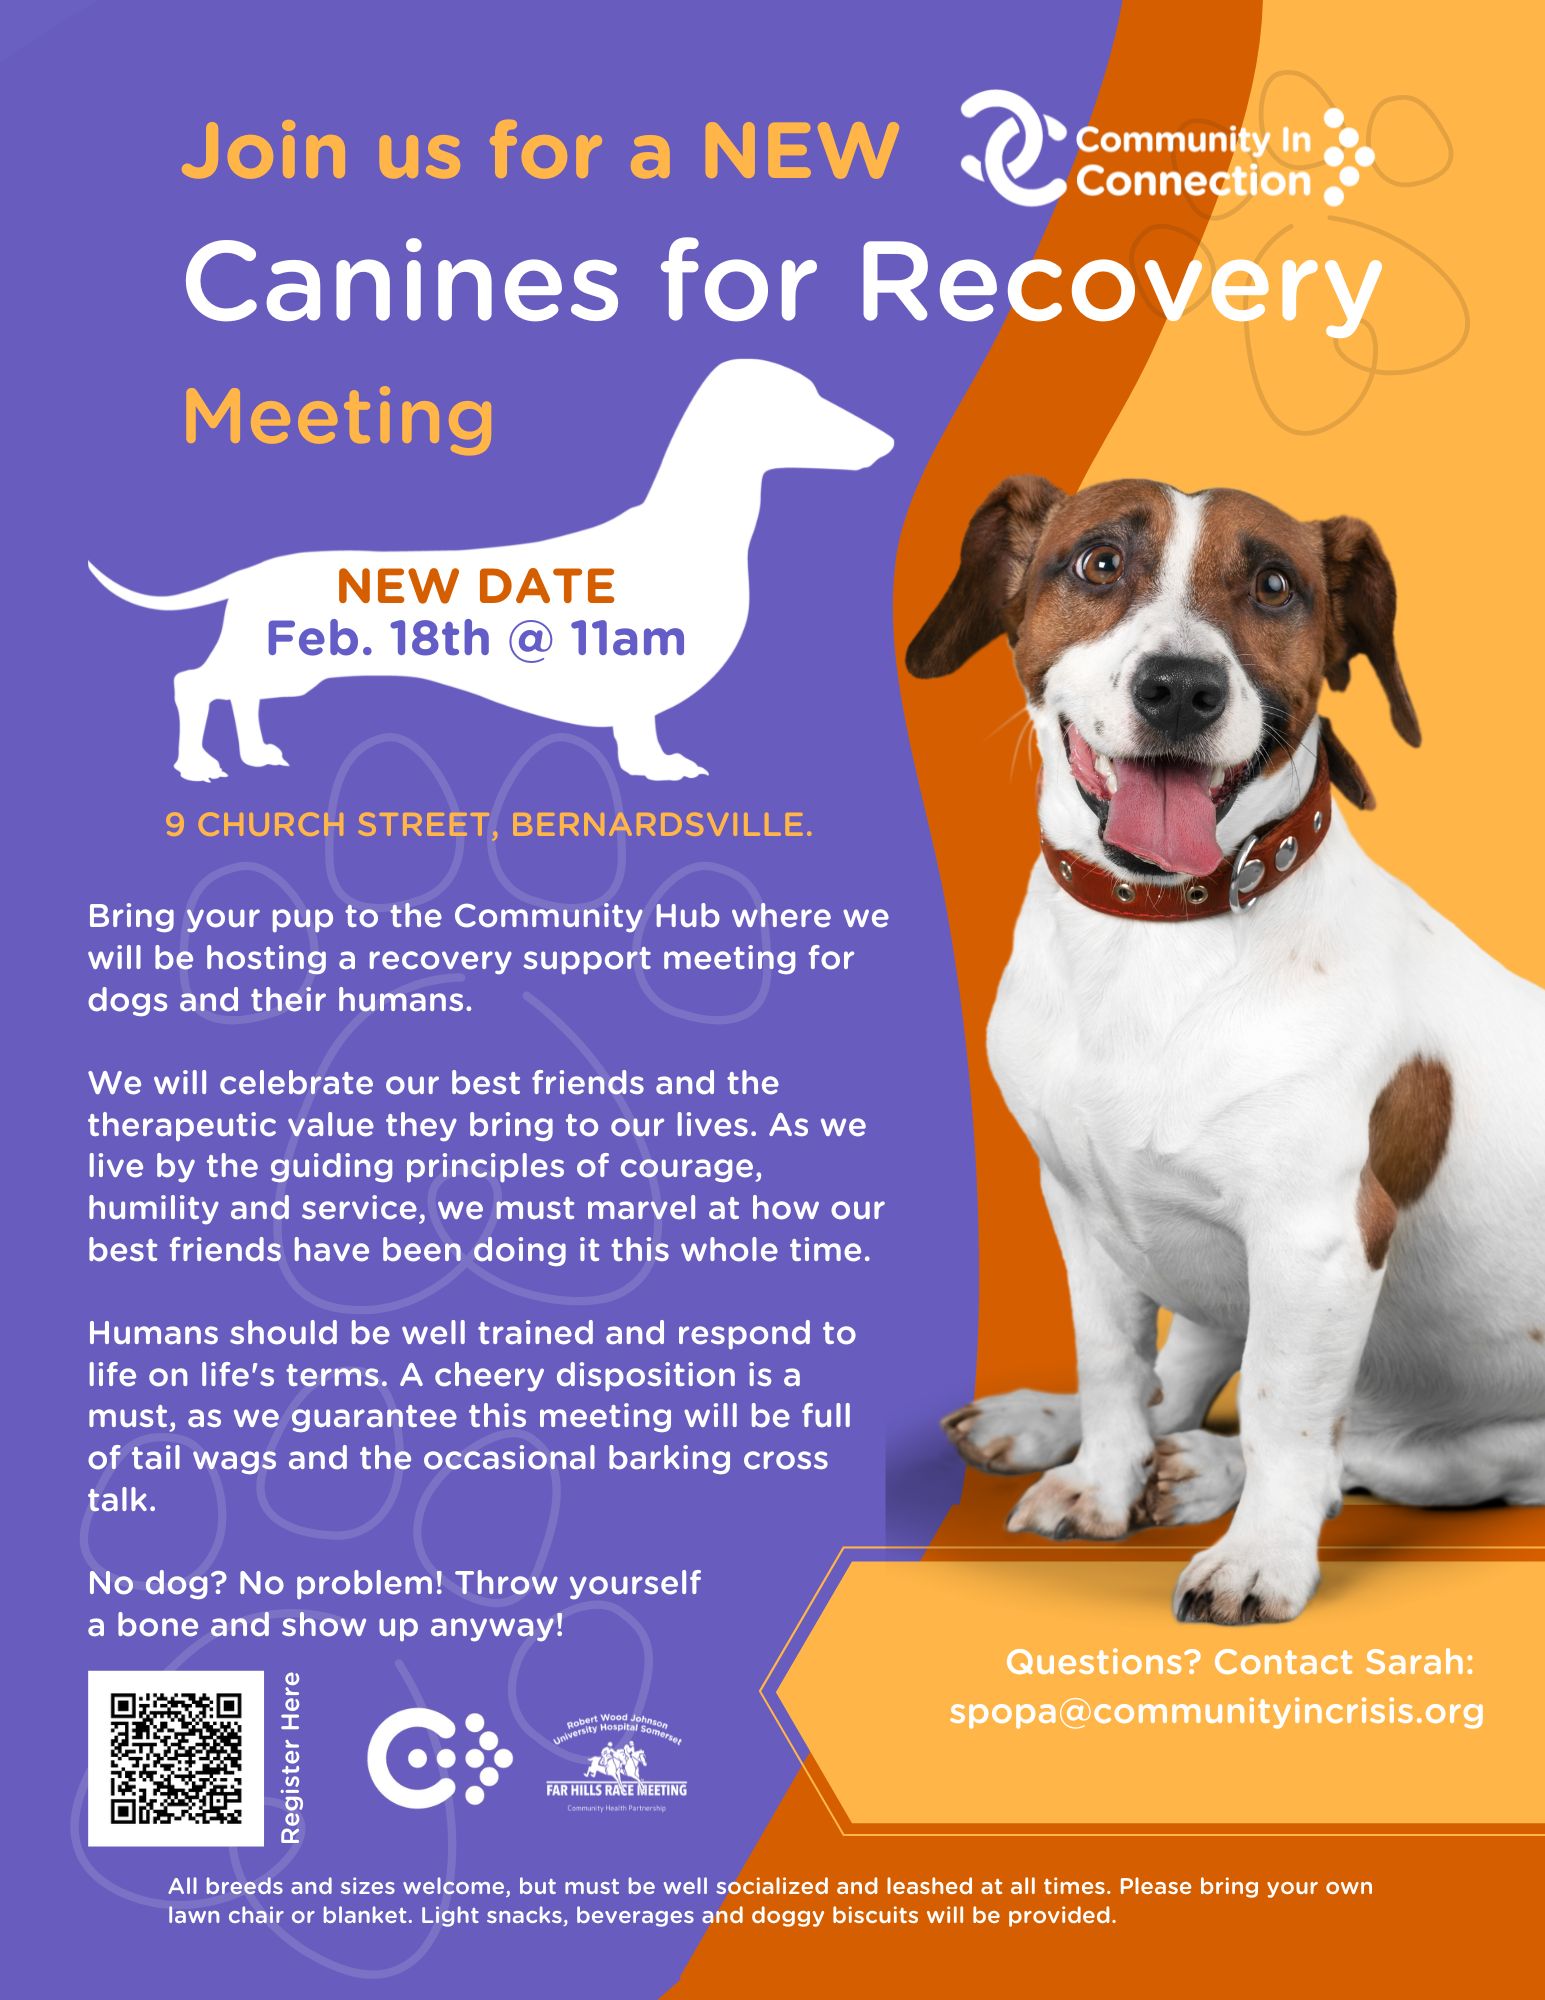 CiC Canines for Recovery February 18